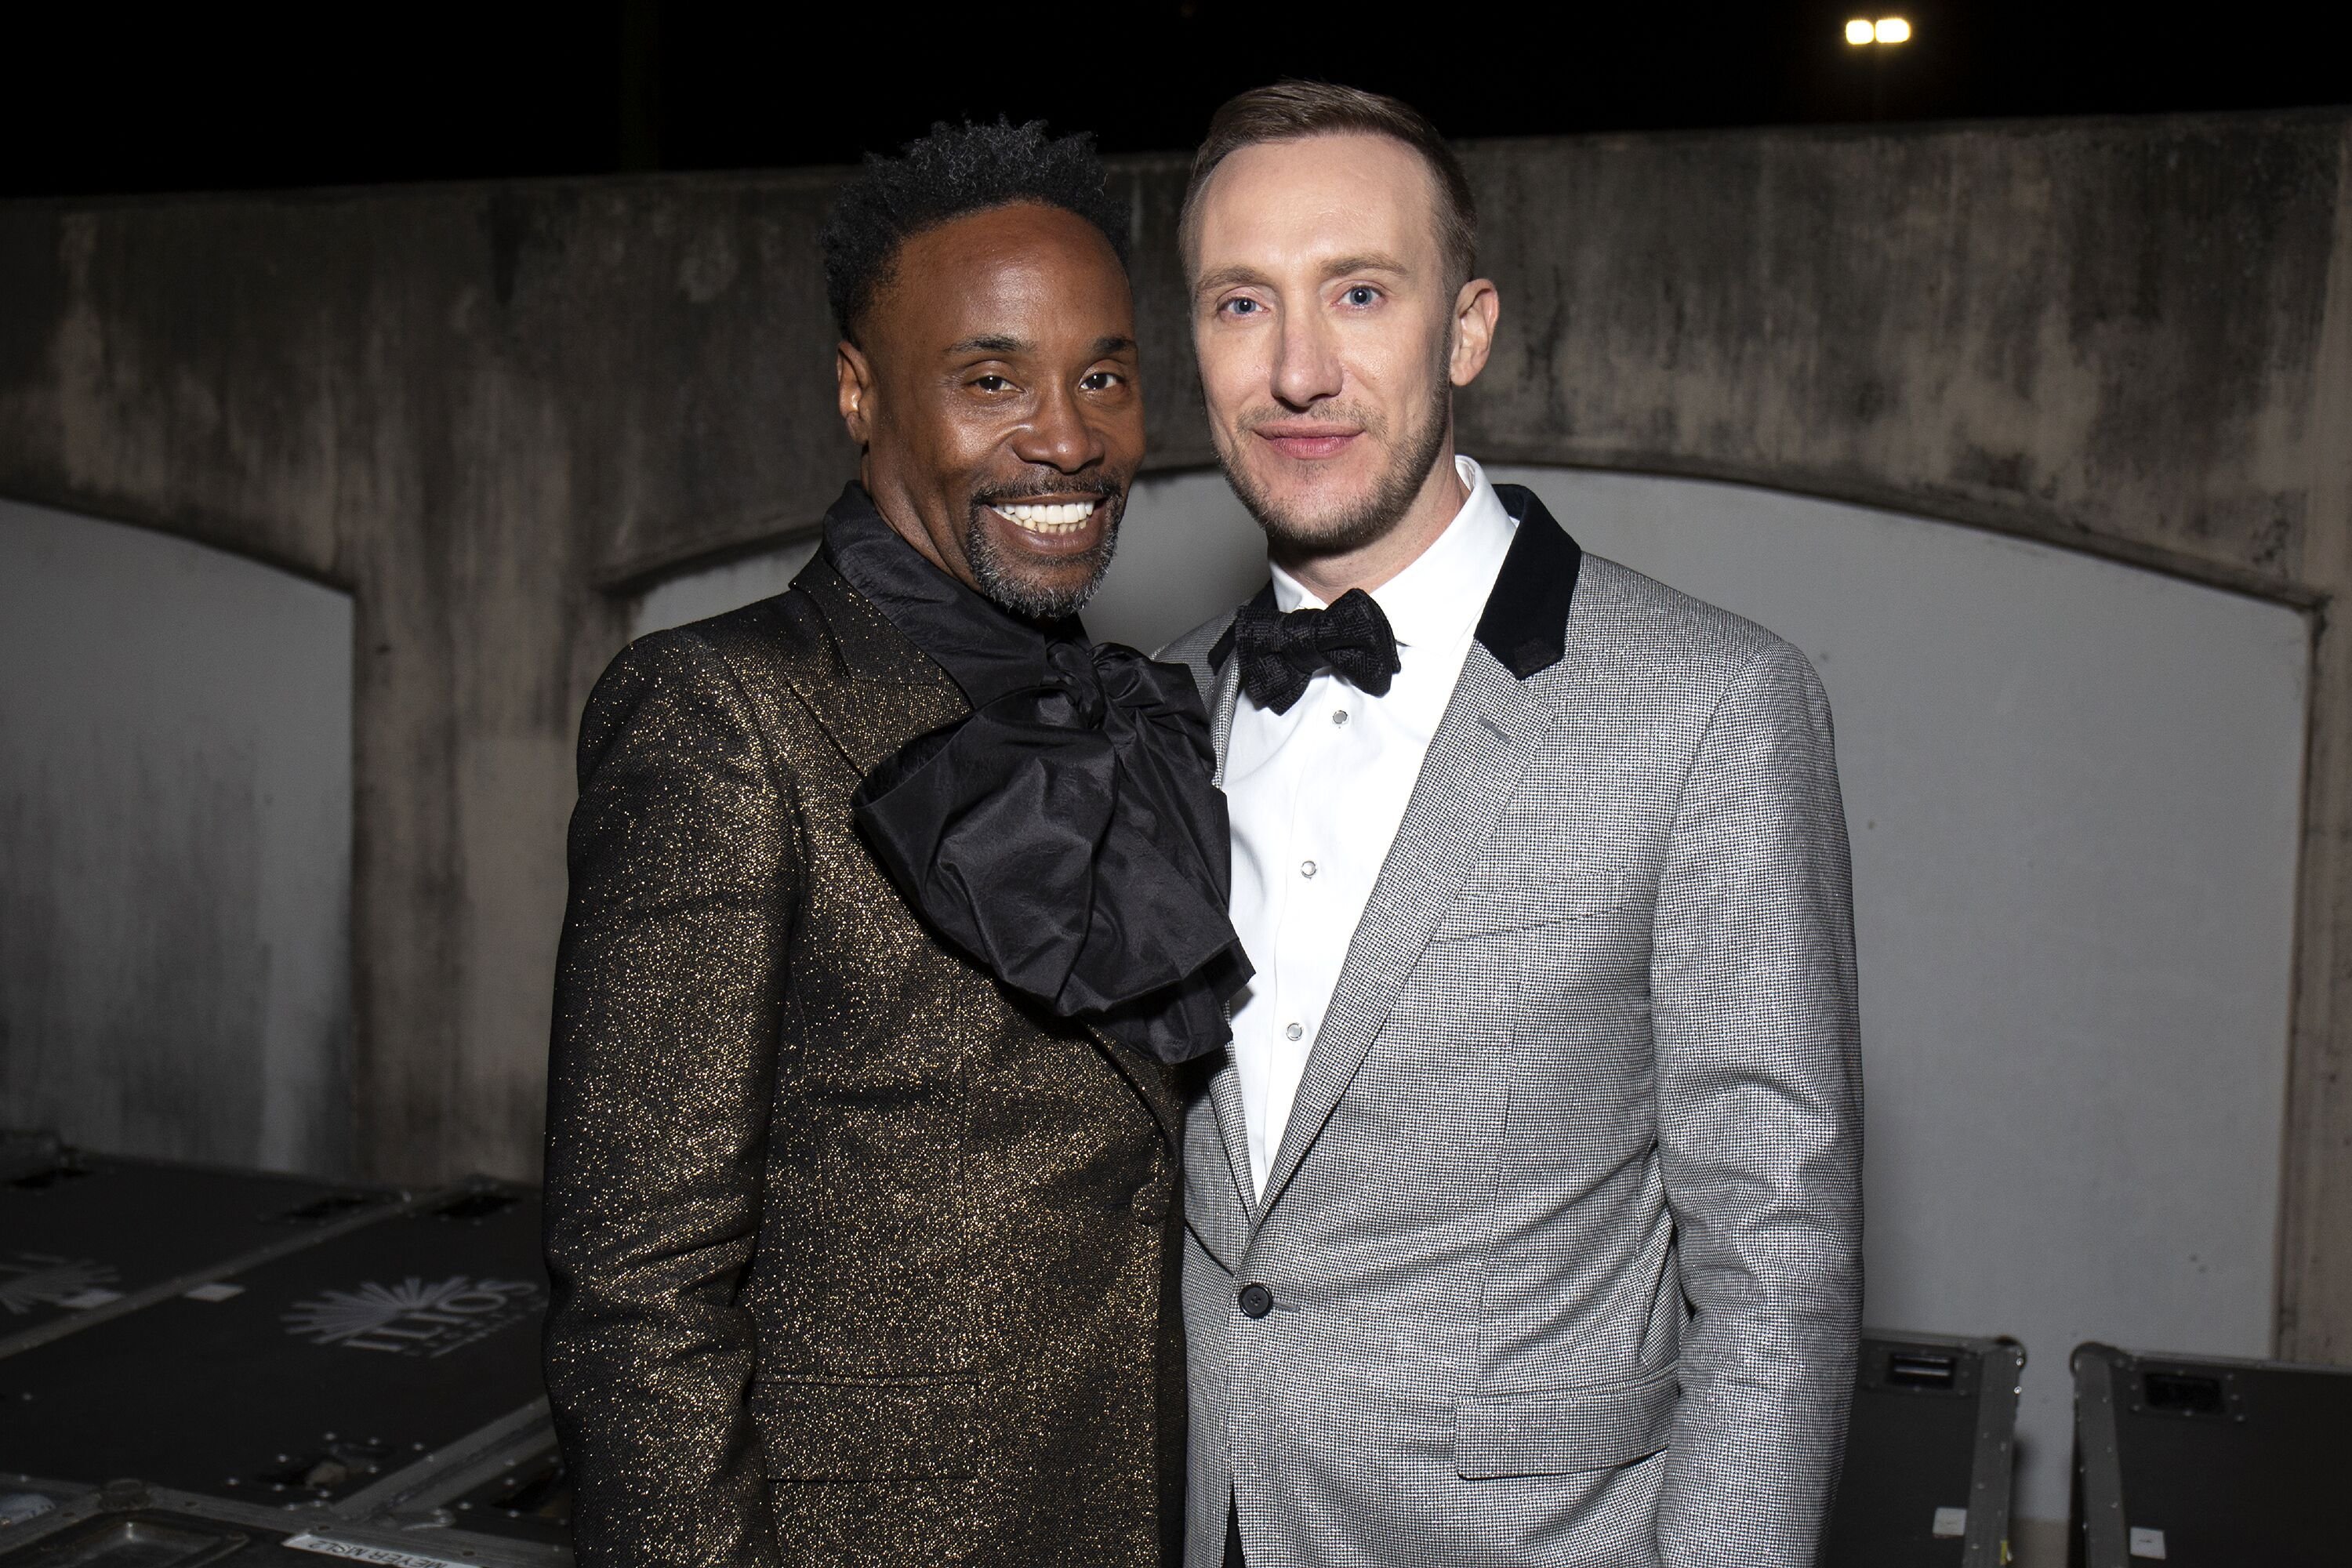 Billy Porter and Adam Smith attend a red carpet event together | Source: Getty Images/GlobalImagesUkraine